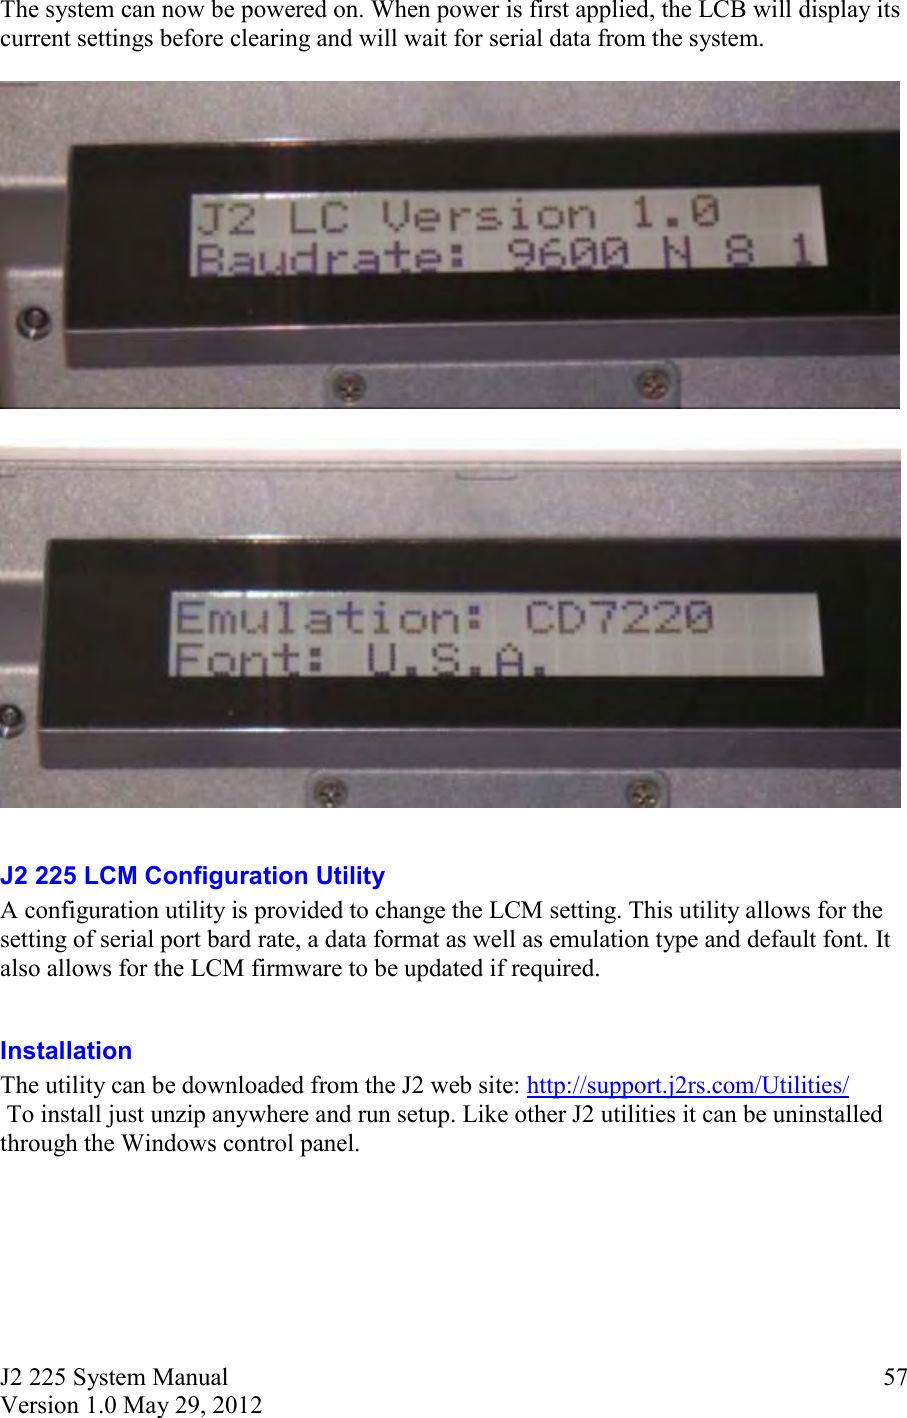 J2 225 System Manual Version 1.0 May 29, 2012      57The system can now be powered on. When power is first applied, the LCB will display its current settings before clearing and will wait for serial data from the system.       J2 225 LCM Configuration Utility A configuration utility is provided to change the LCM setting. This utility allows for the setting of serial port bard rate, a data format as well as emulation type and default font. It also allows for the LCM firmware to be updated if required.  Installation  The utility can be downloaded from the J2 web site: http://support.j2rs.com/Utilities/  To install just unzip anywhere and run setup. Like other J2 utilities it can be uninstalled through the Windows control panel.    